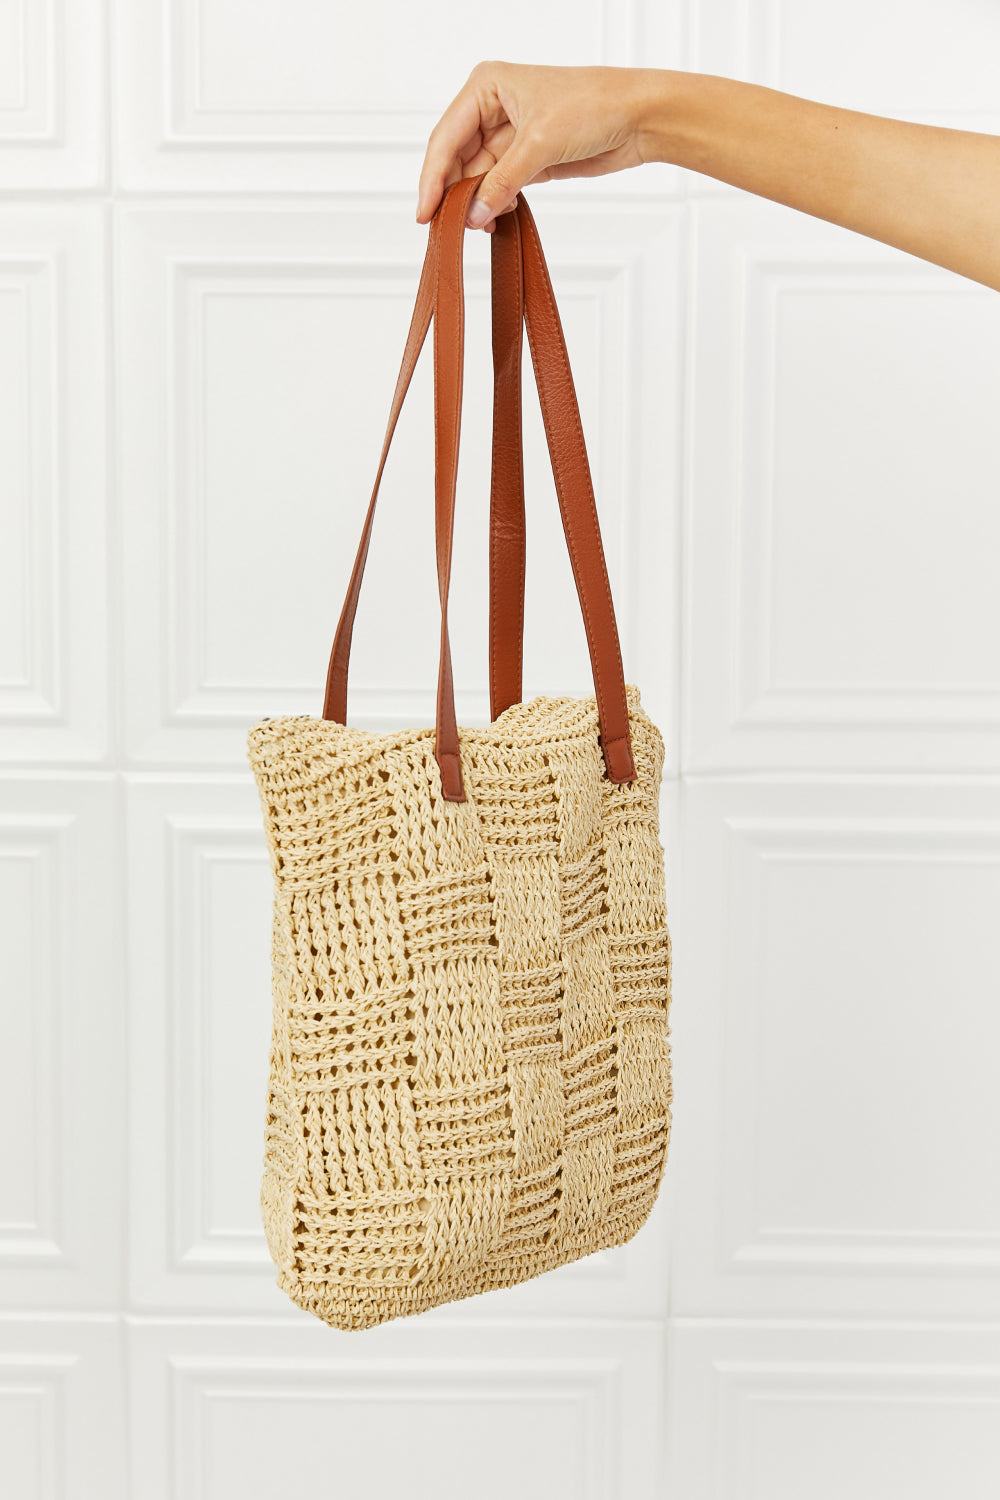 Fame Picnic Date Straw Tote Bag  Sunset and Swim   